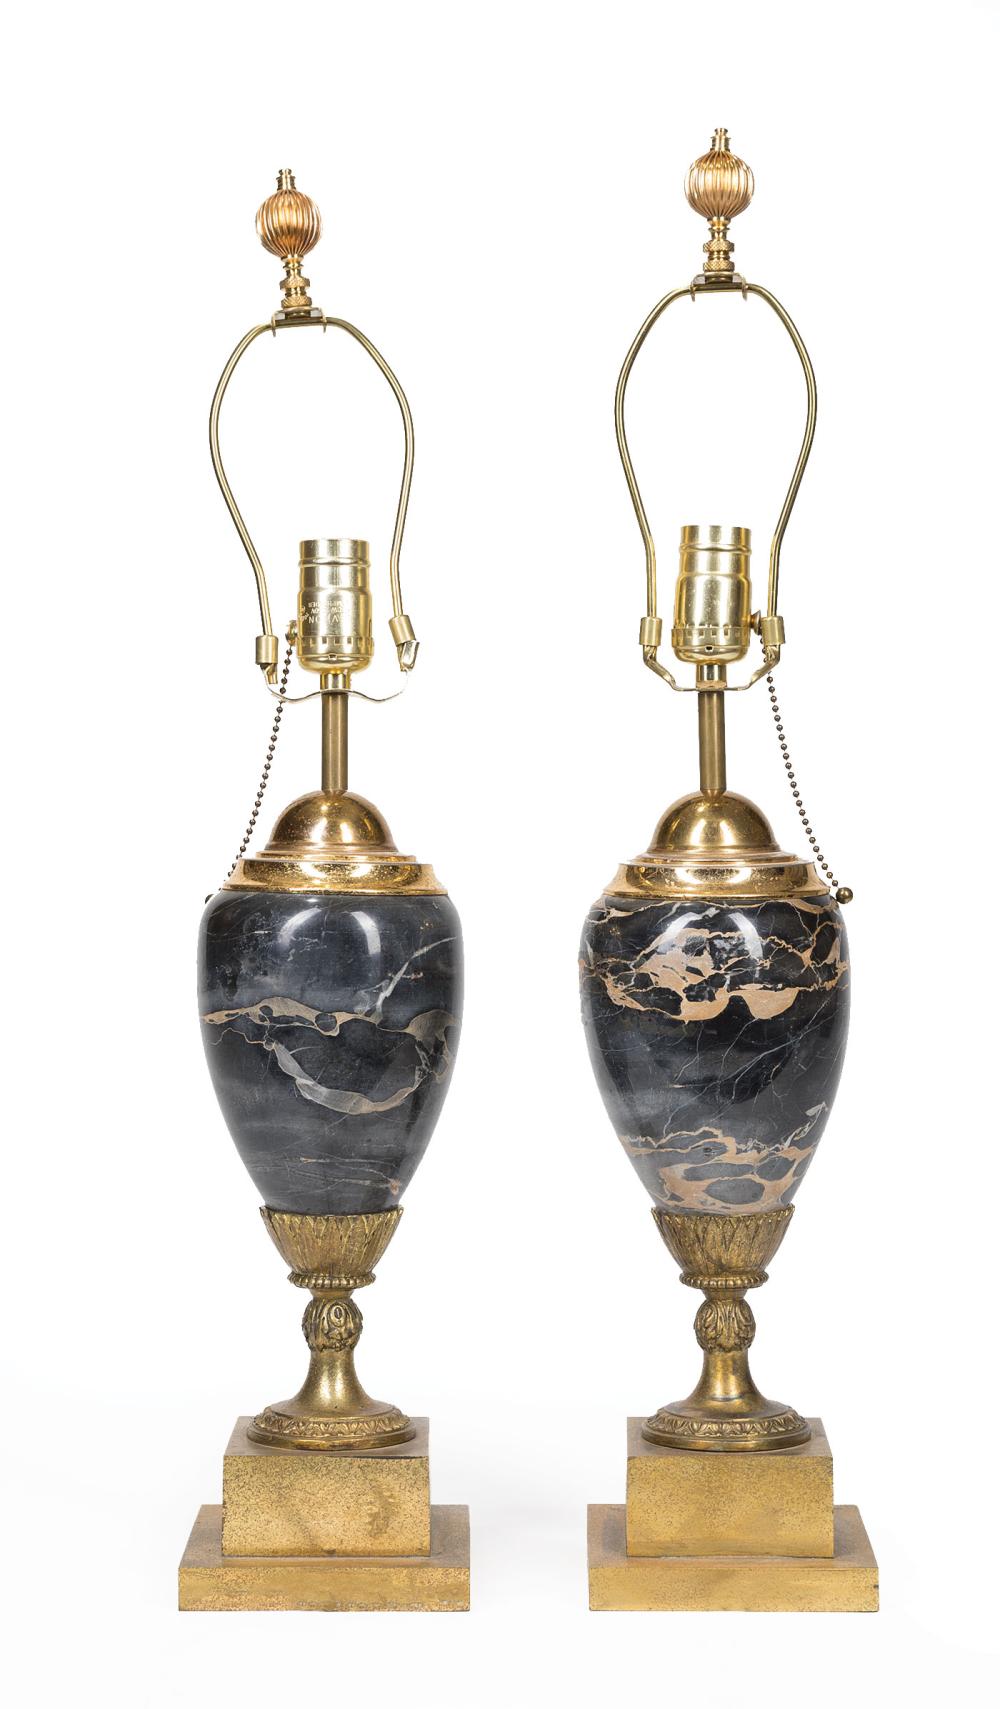 PAIR OF CONTINENTAL GILT BRONZE AND